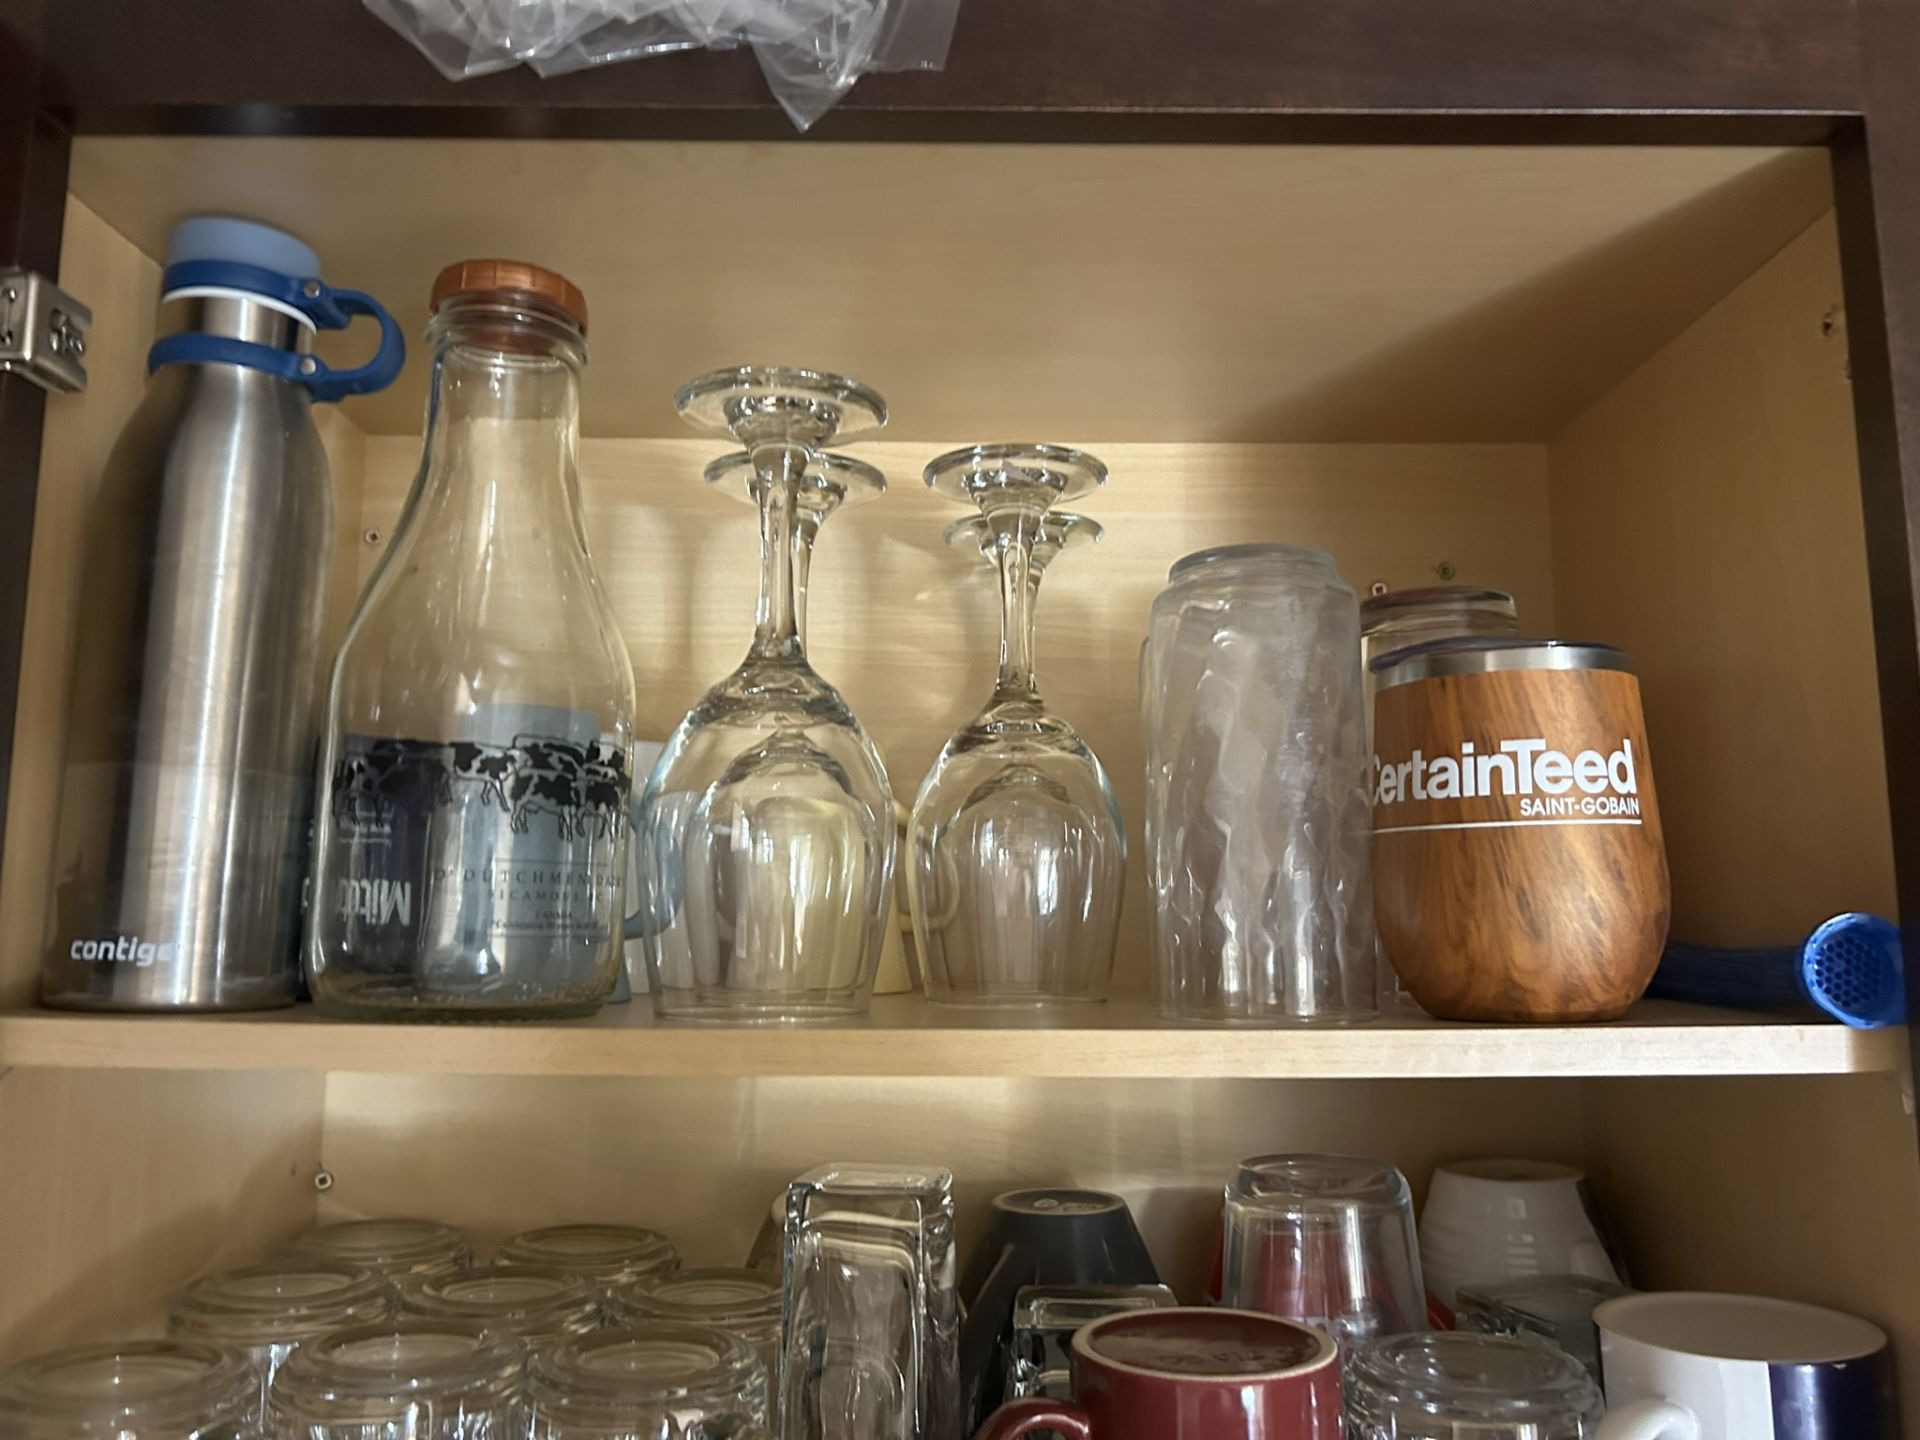 L/O ASSORTED GLASSES, INSULATED TRAVEL MUGS, CUPS, ETC. - Image 2 of 7